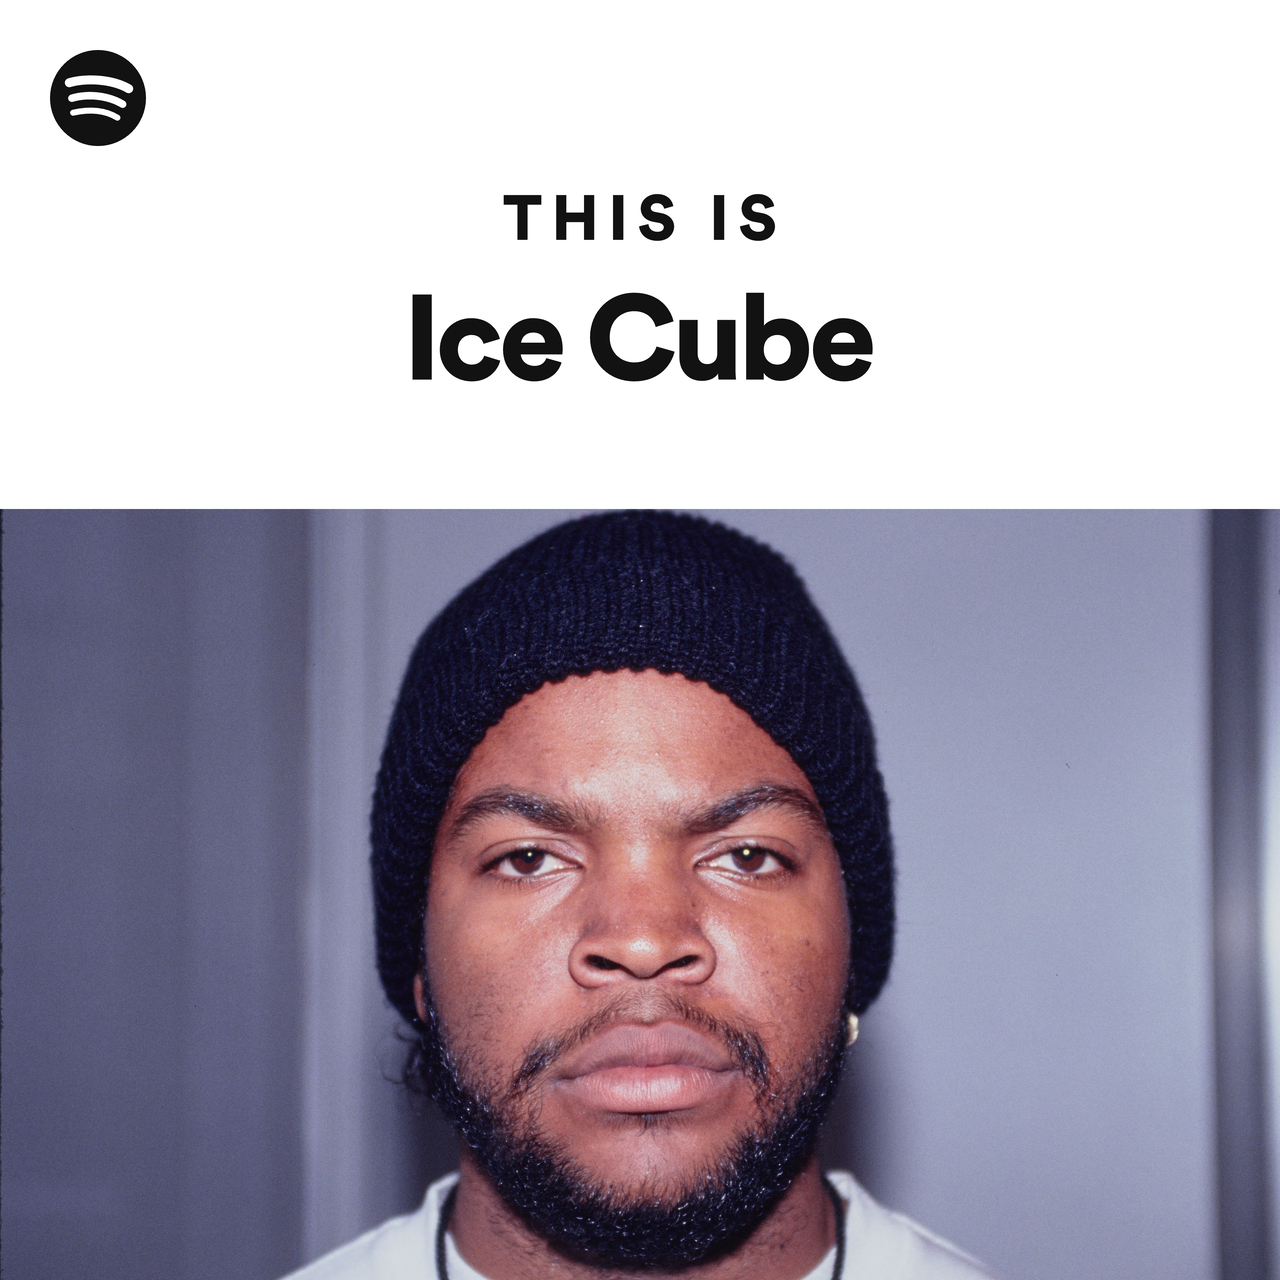 Ice Cube | Spotify